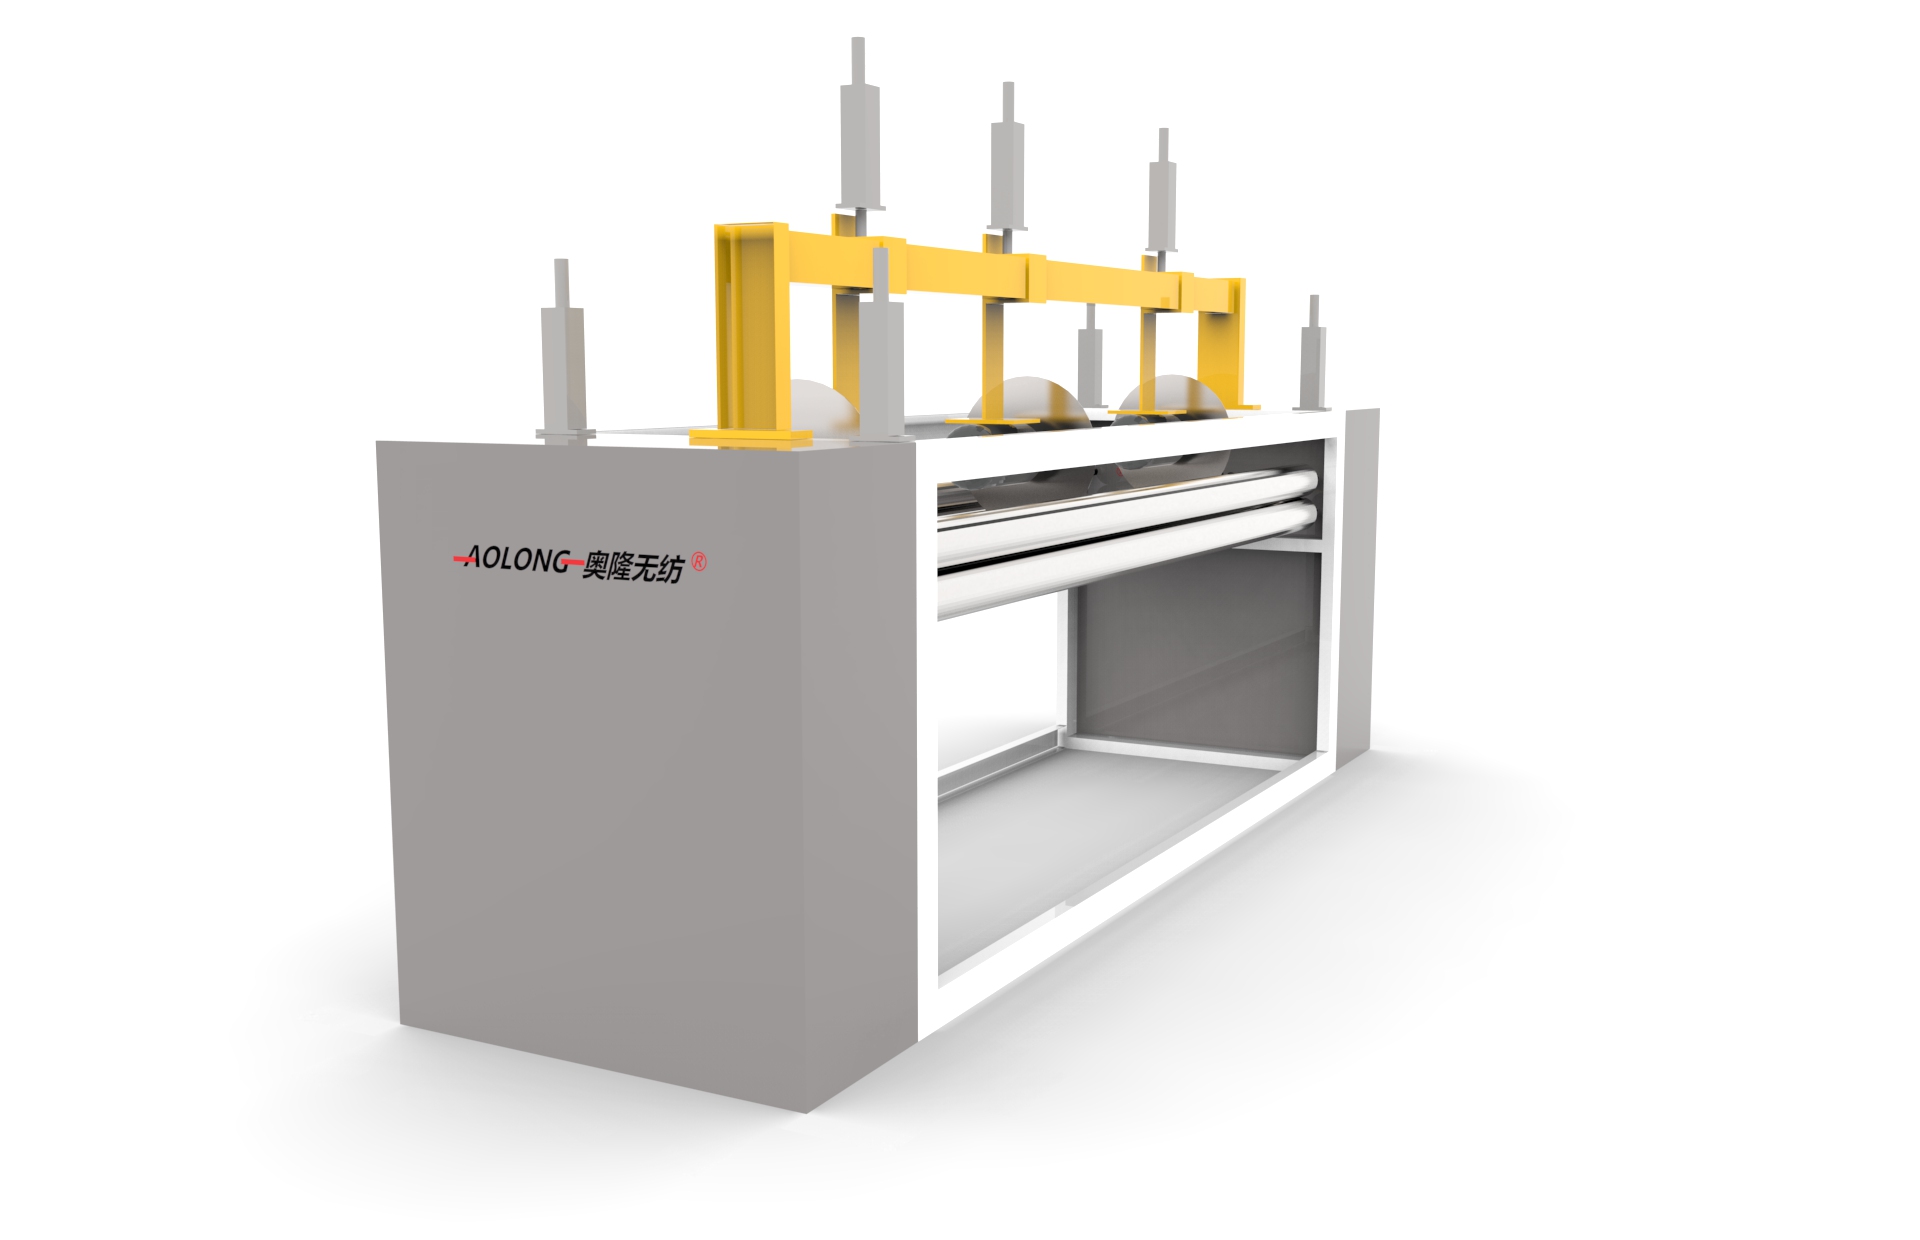 Why do we need the non-woven needle punching machine?